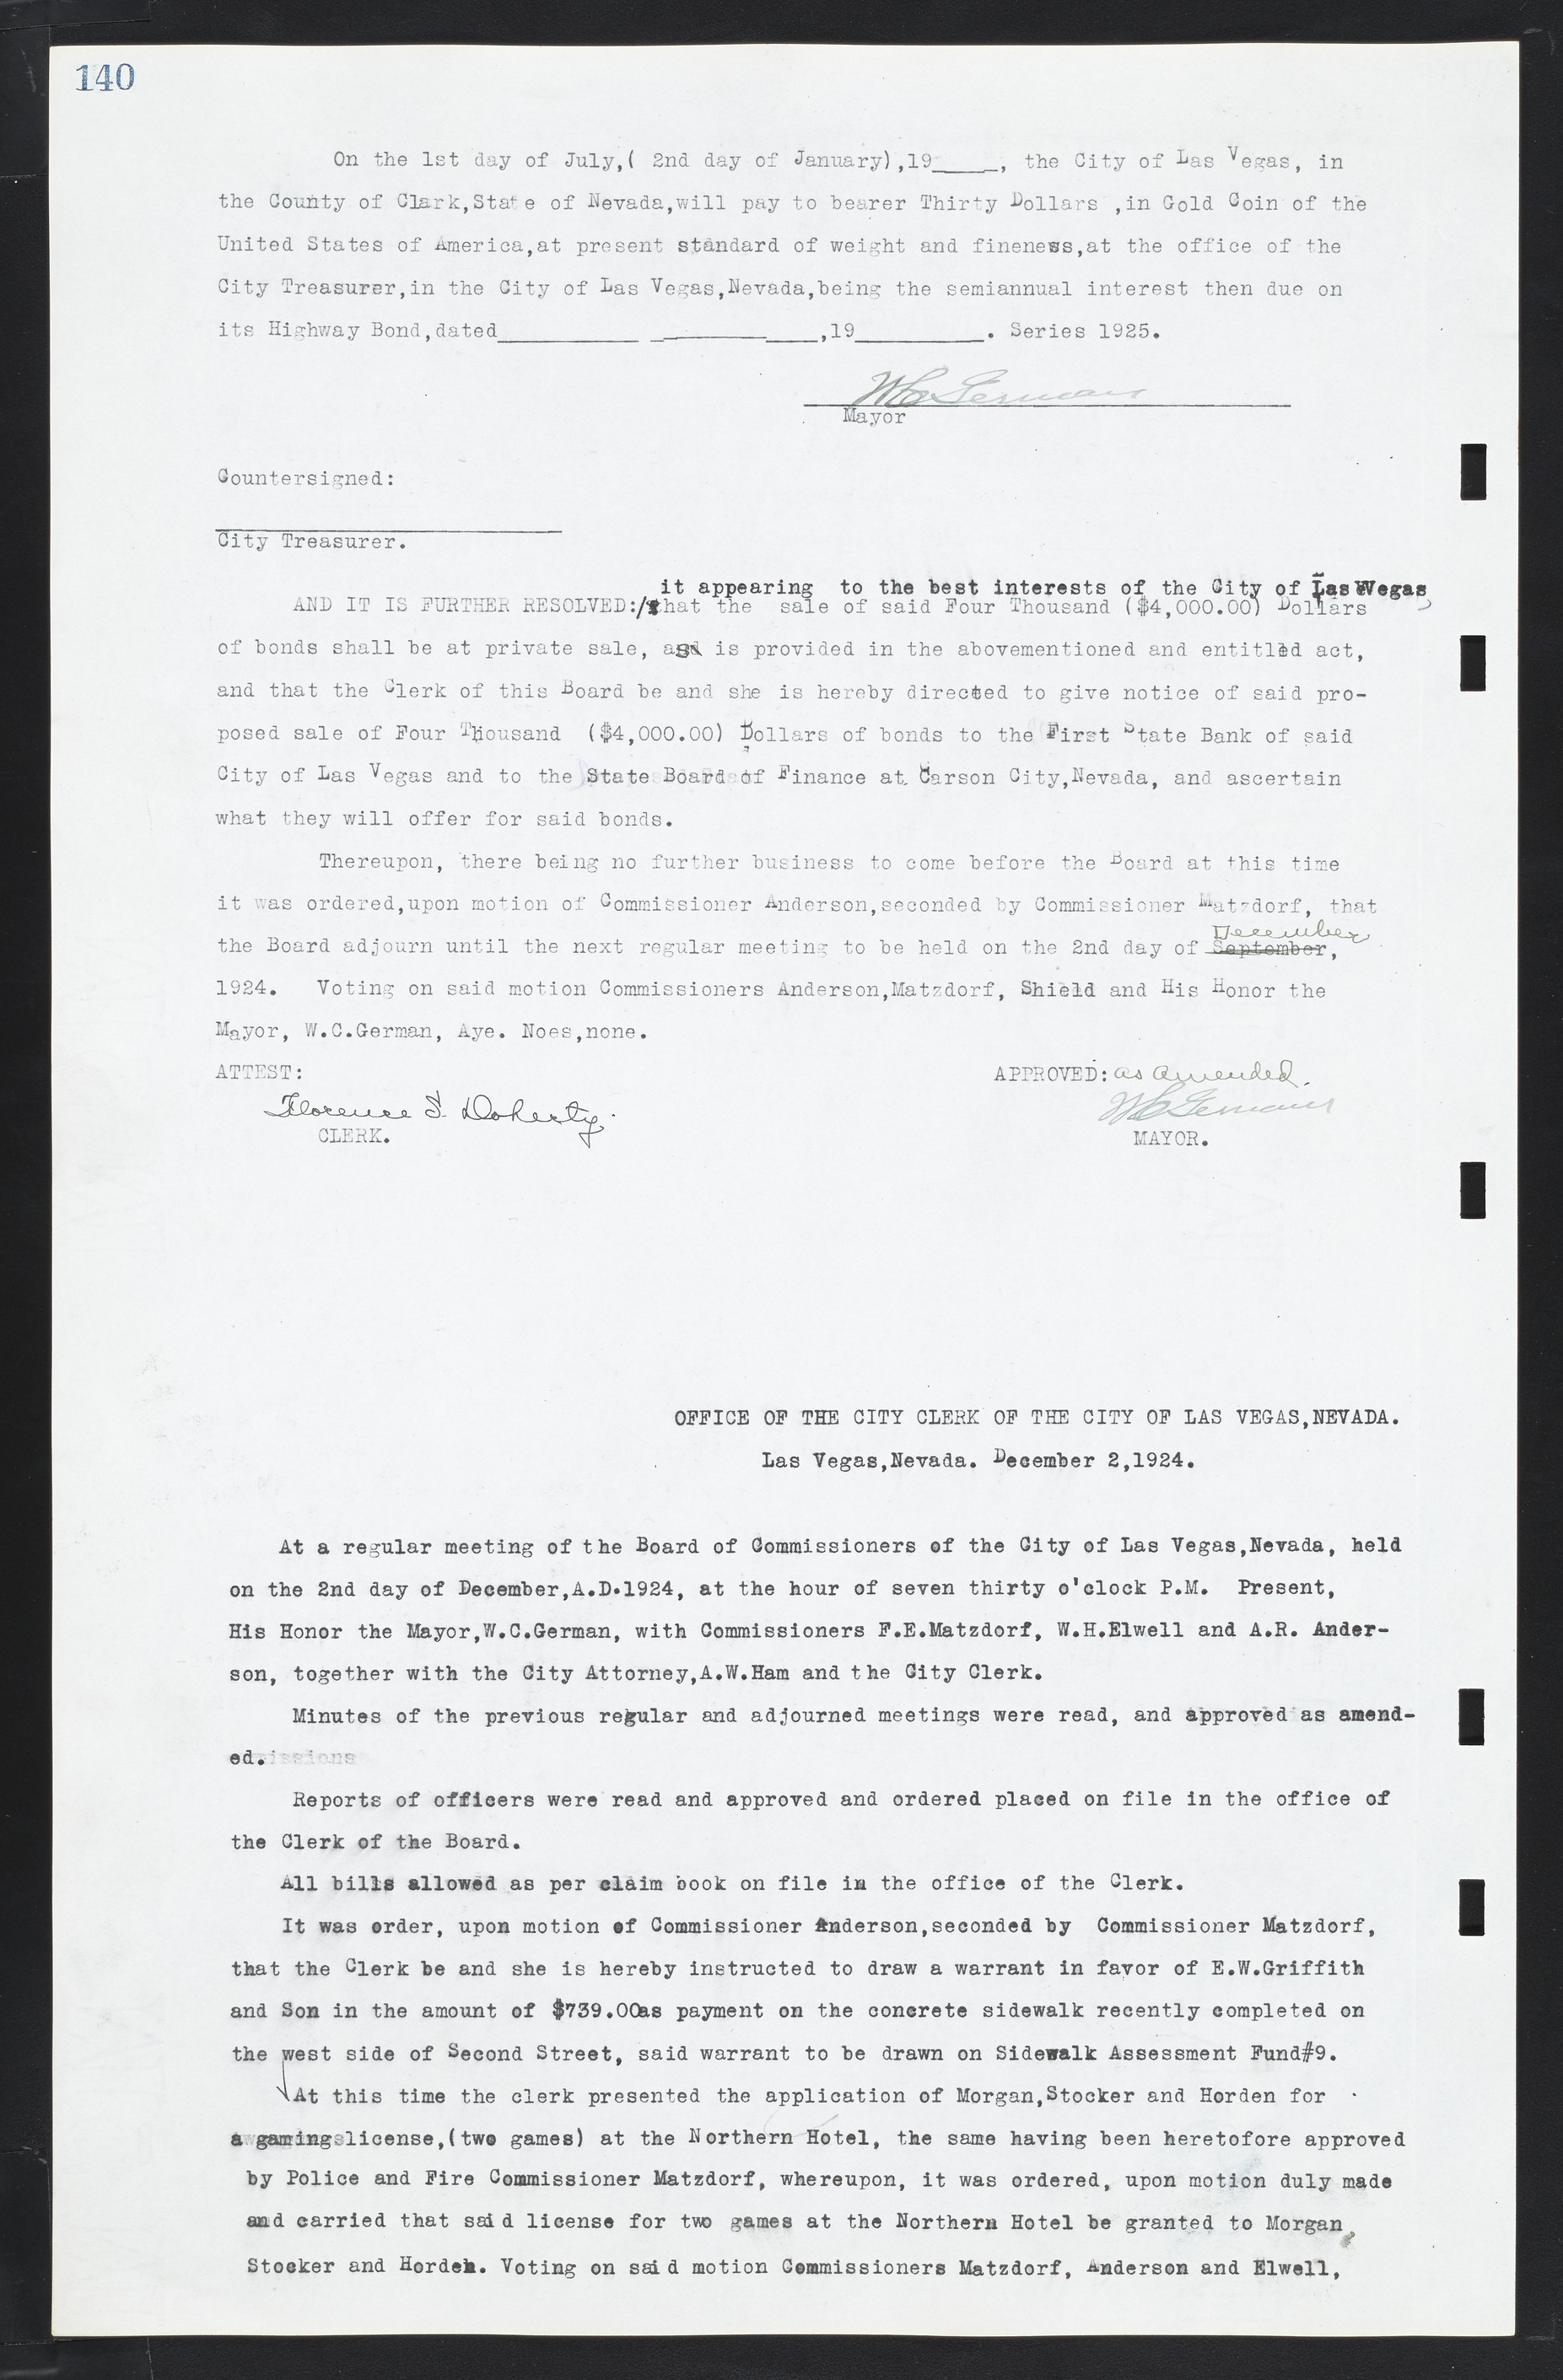 Las Vegas City Commission Minutes, March 1, 1922 to May 10, 1929, lvc000002-147